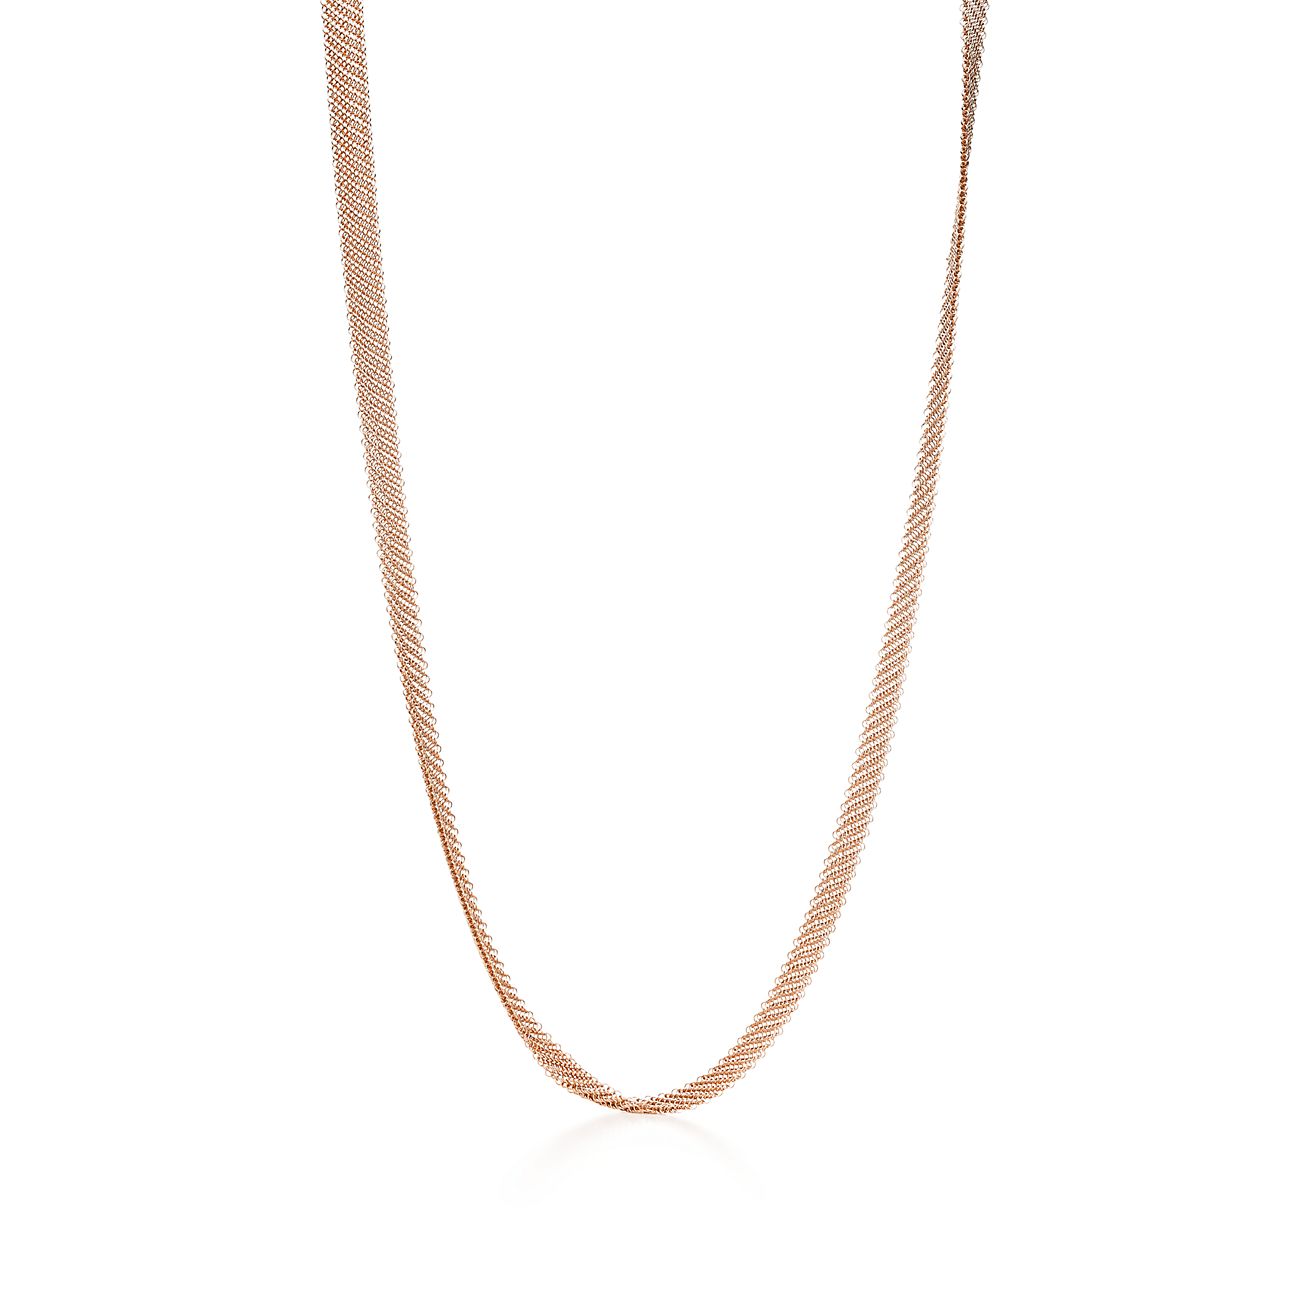 Men Necklace 14kt Gold Mesh Chain, Size: 15inch at best price in Surat |  ID: 25388901191